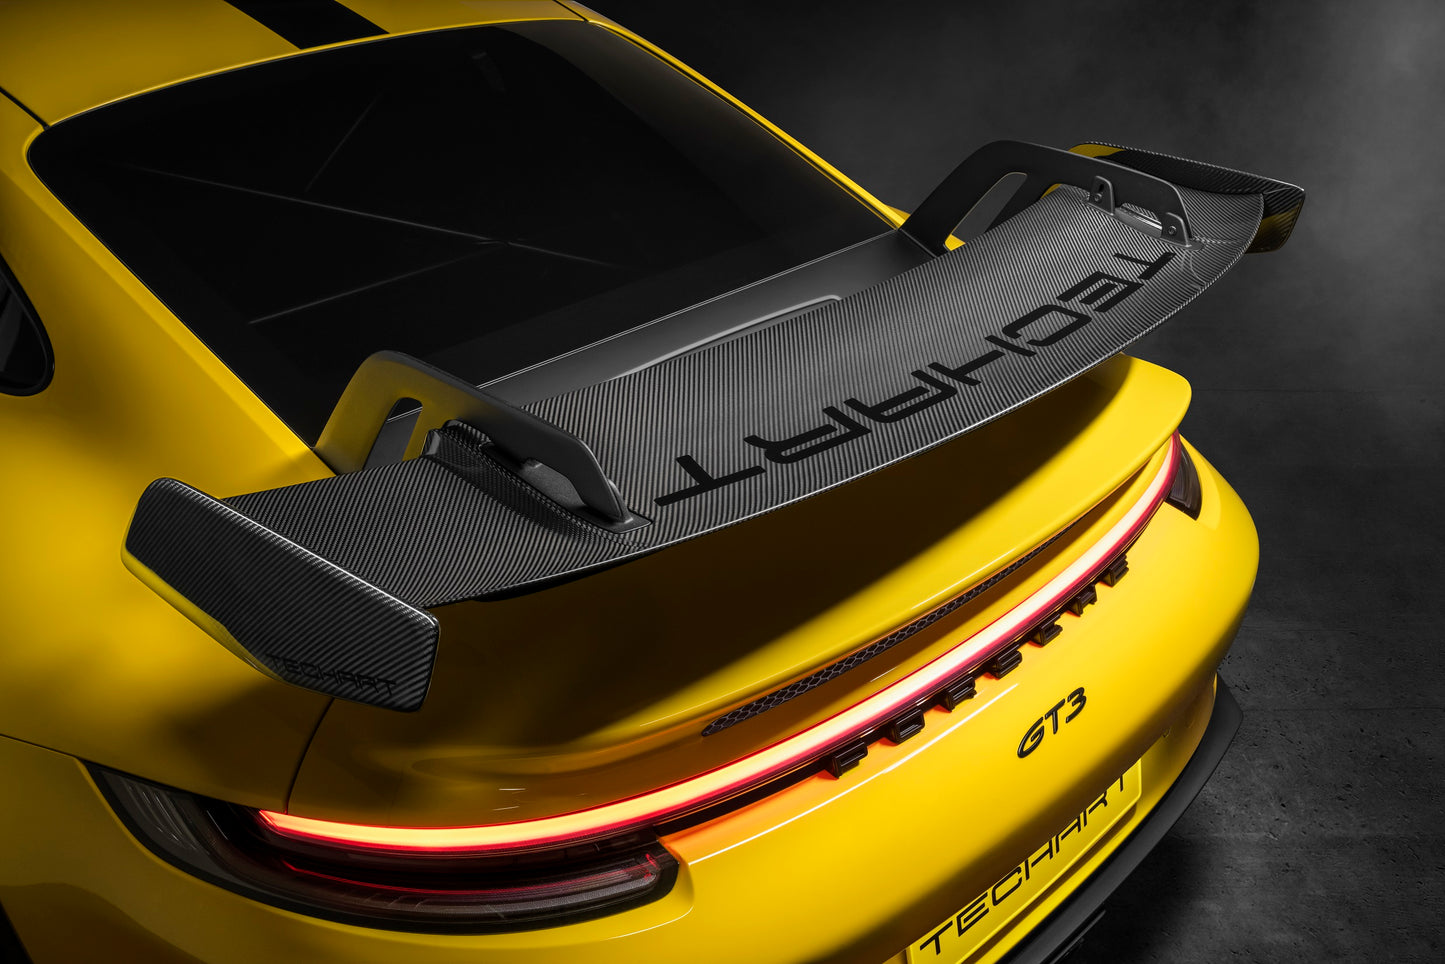 TECHART Rear Spoiler profile w/ Wing End Plates for 992 GT3